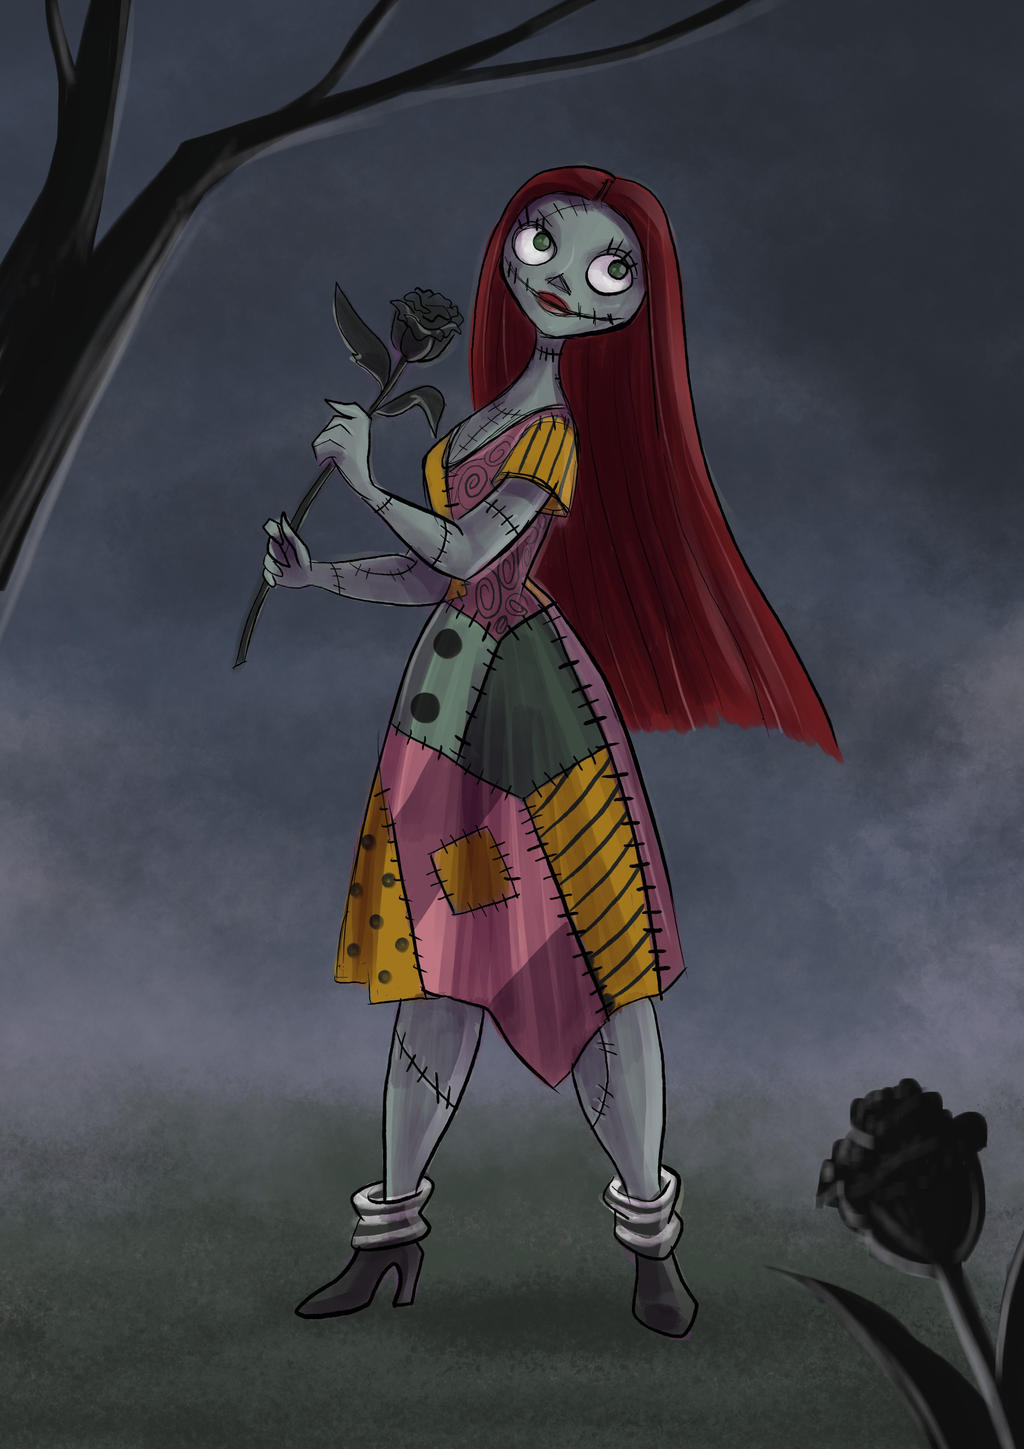 Nightmare before Christmas - Sally by Symphan on DeviantArt